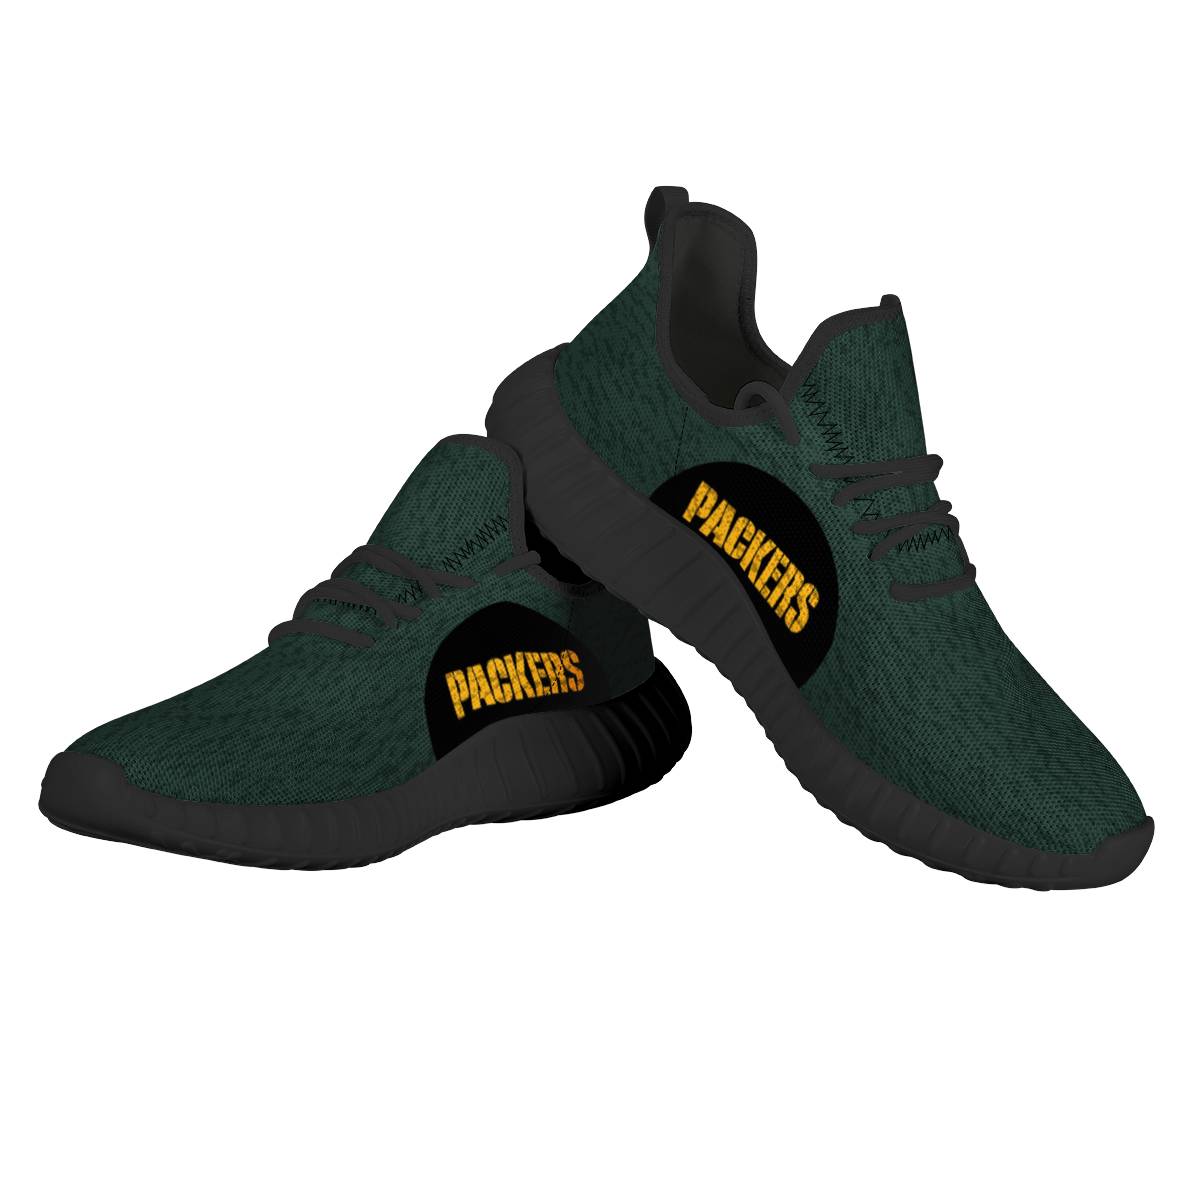 Women's NFL Green Bay Packers Mesh Knit Sneakers/Shoes 001